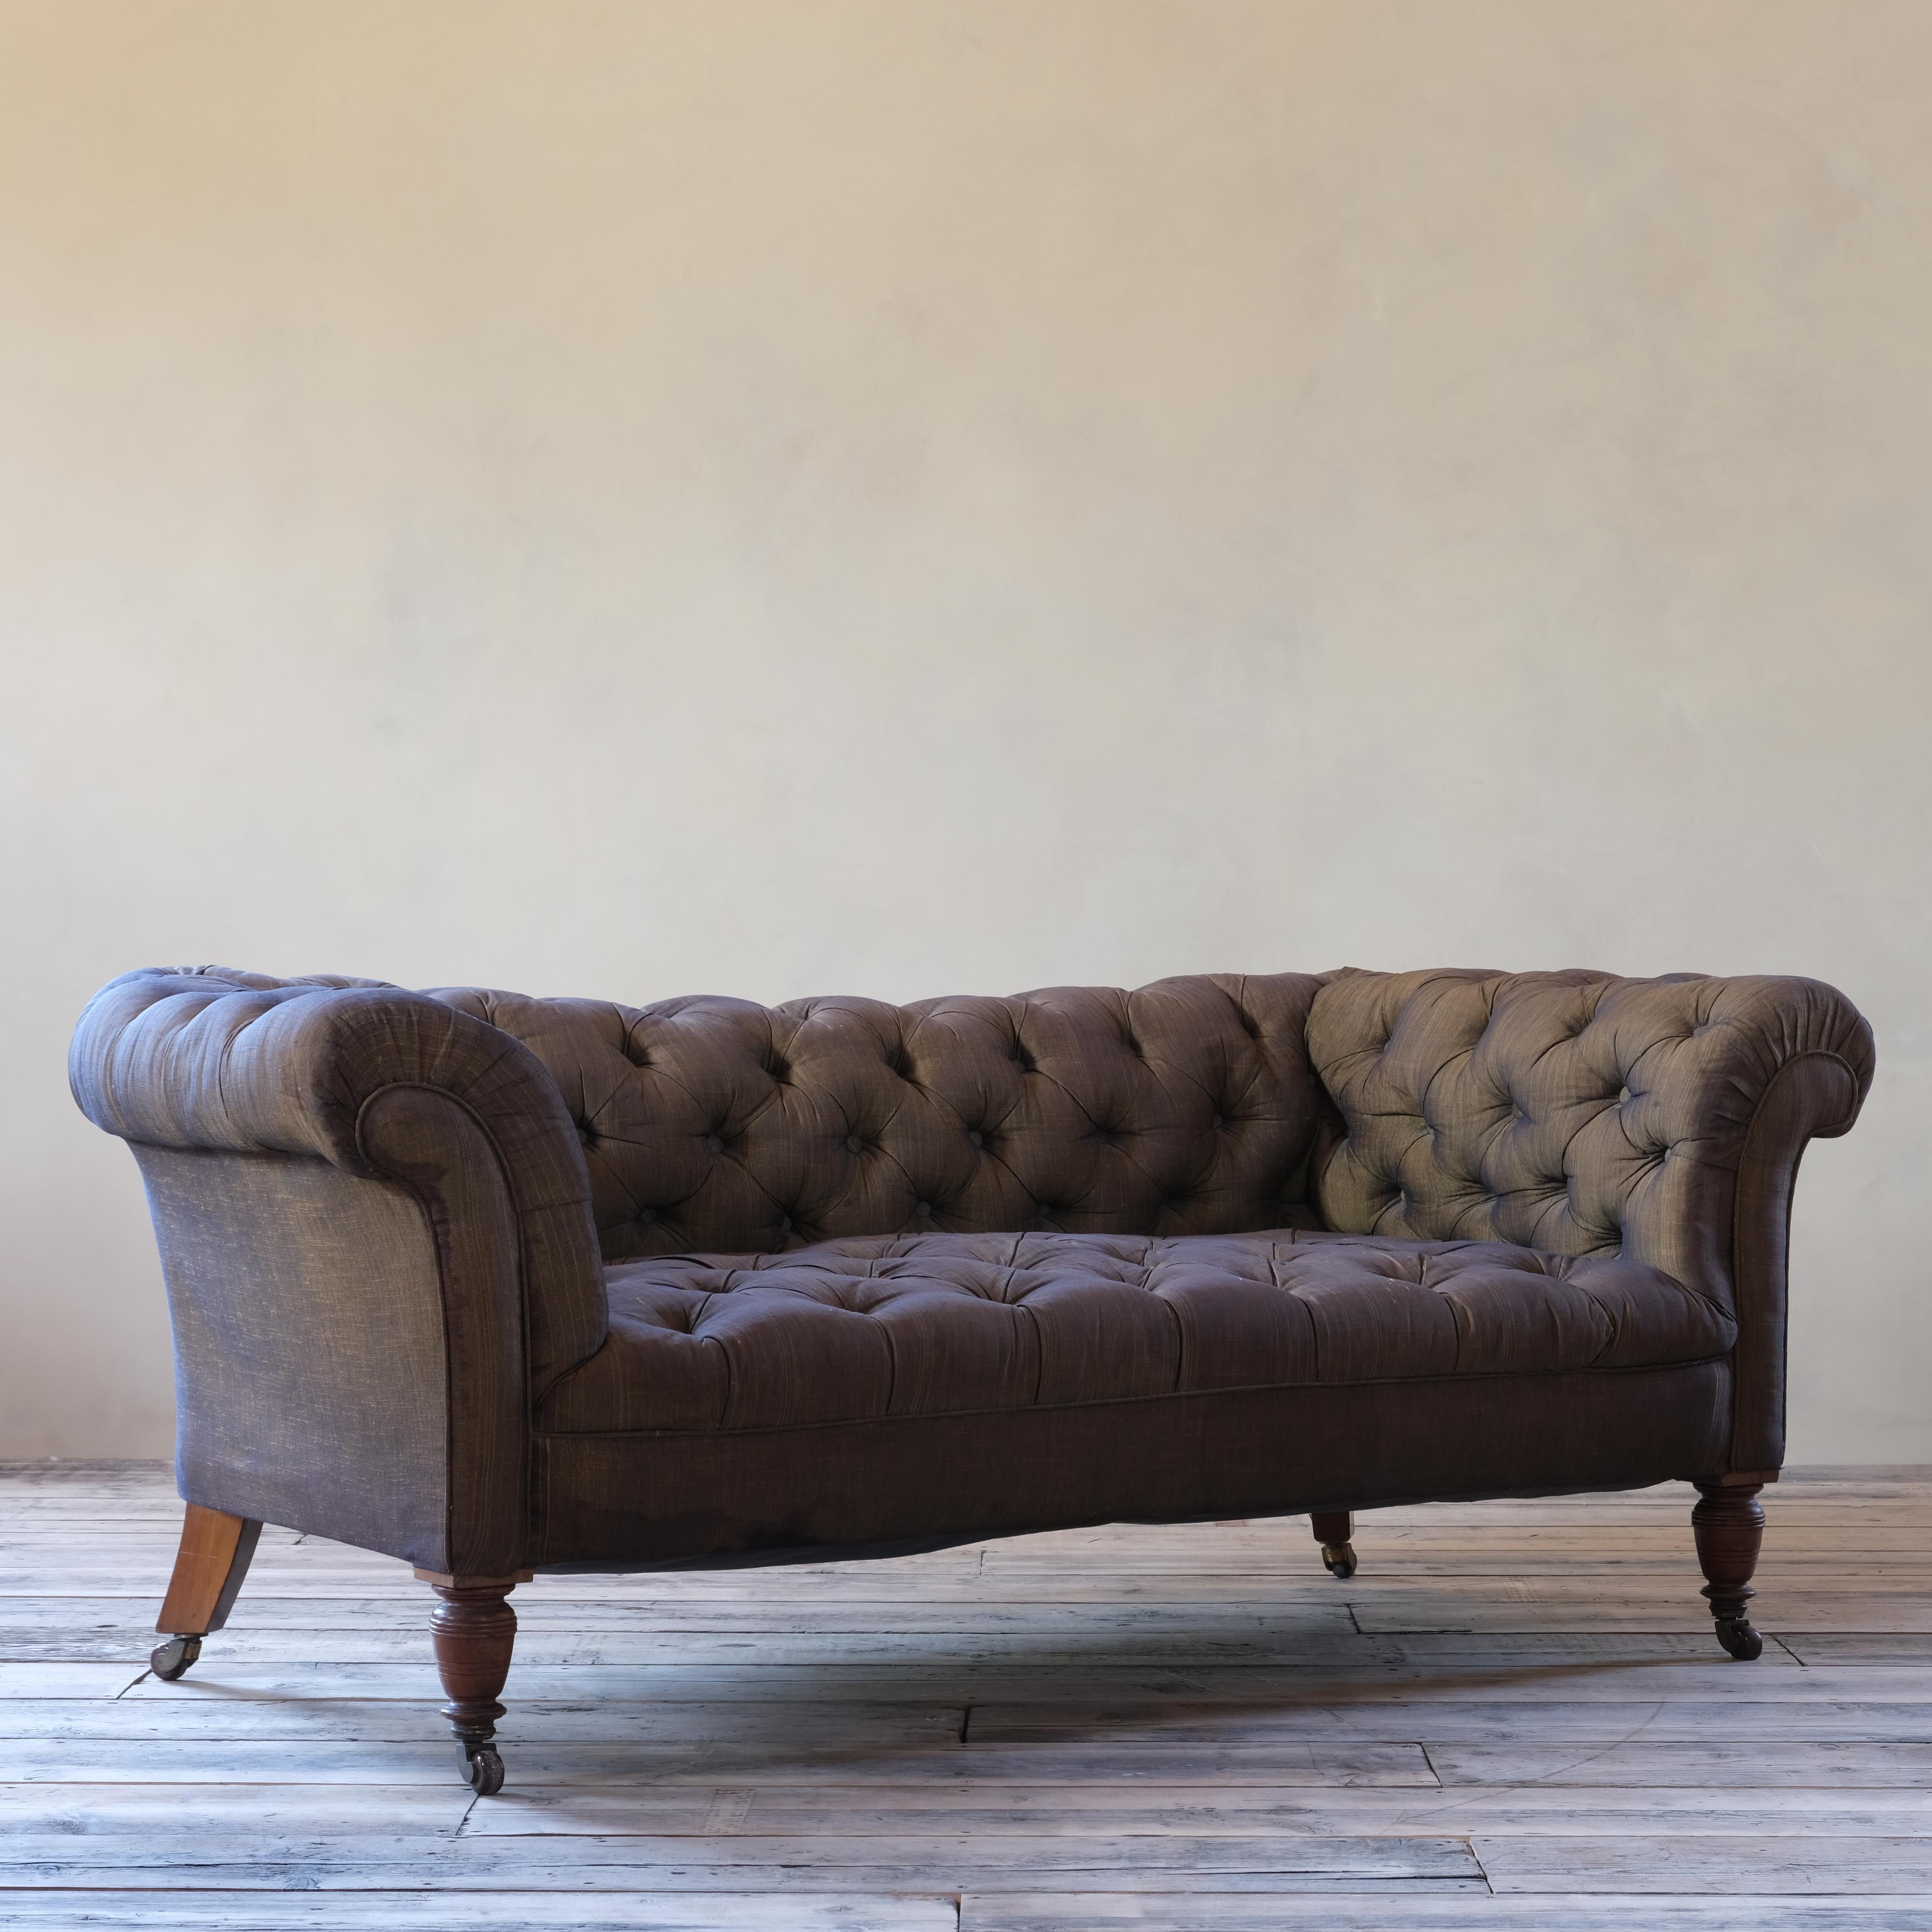 British 19th Century Chesterfield Sofa by Hampton and Sons, London